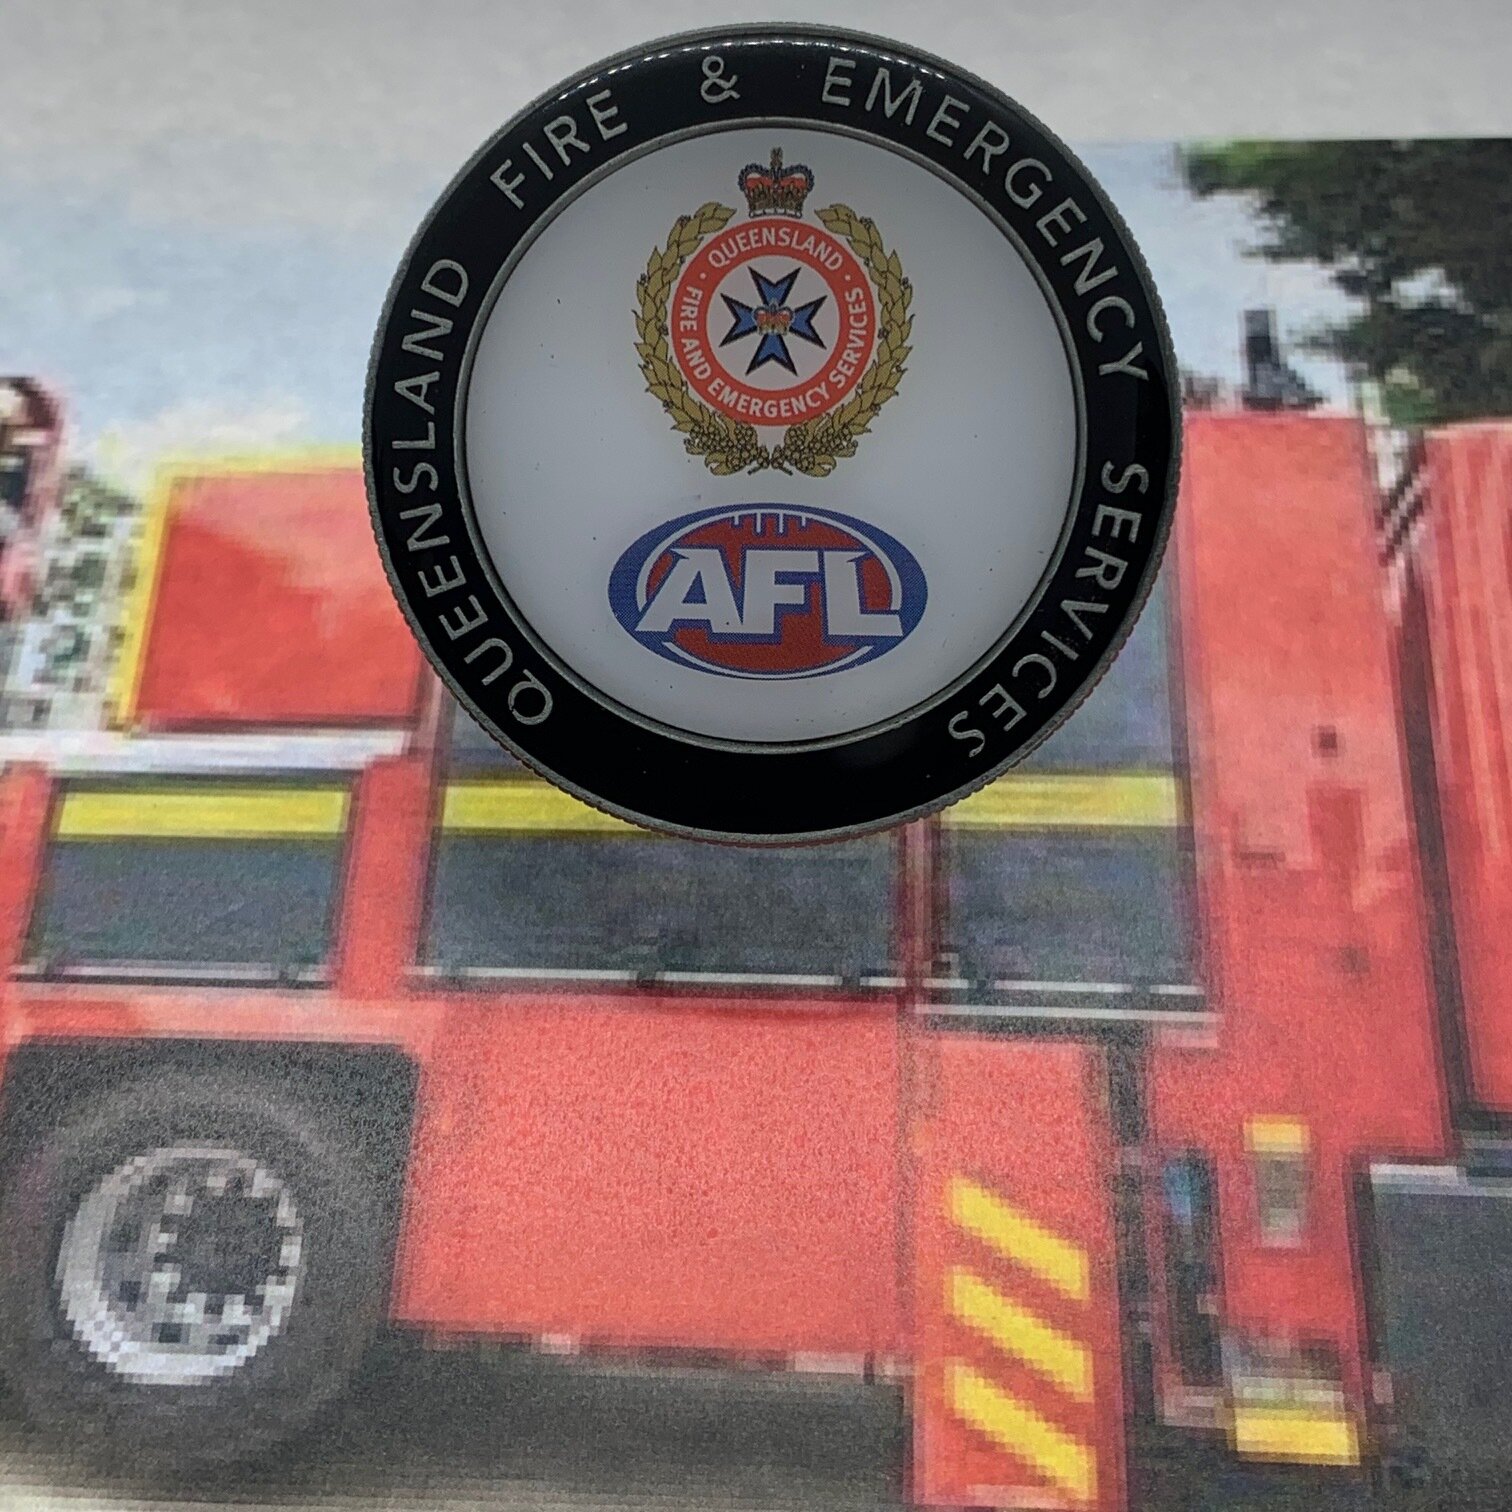 Queenland Fire and Emergency Services Versus Queensland Police Service Annual AFL Game - Back